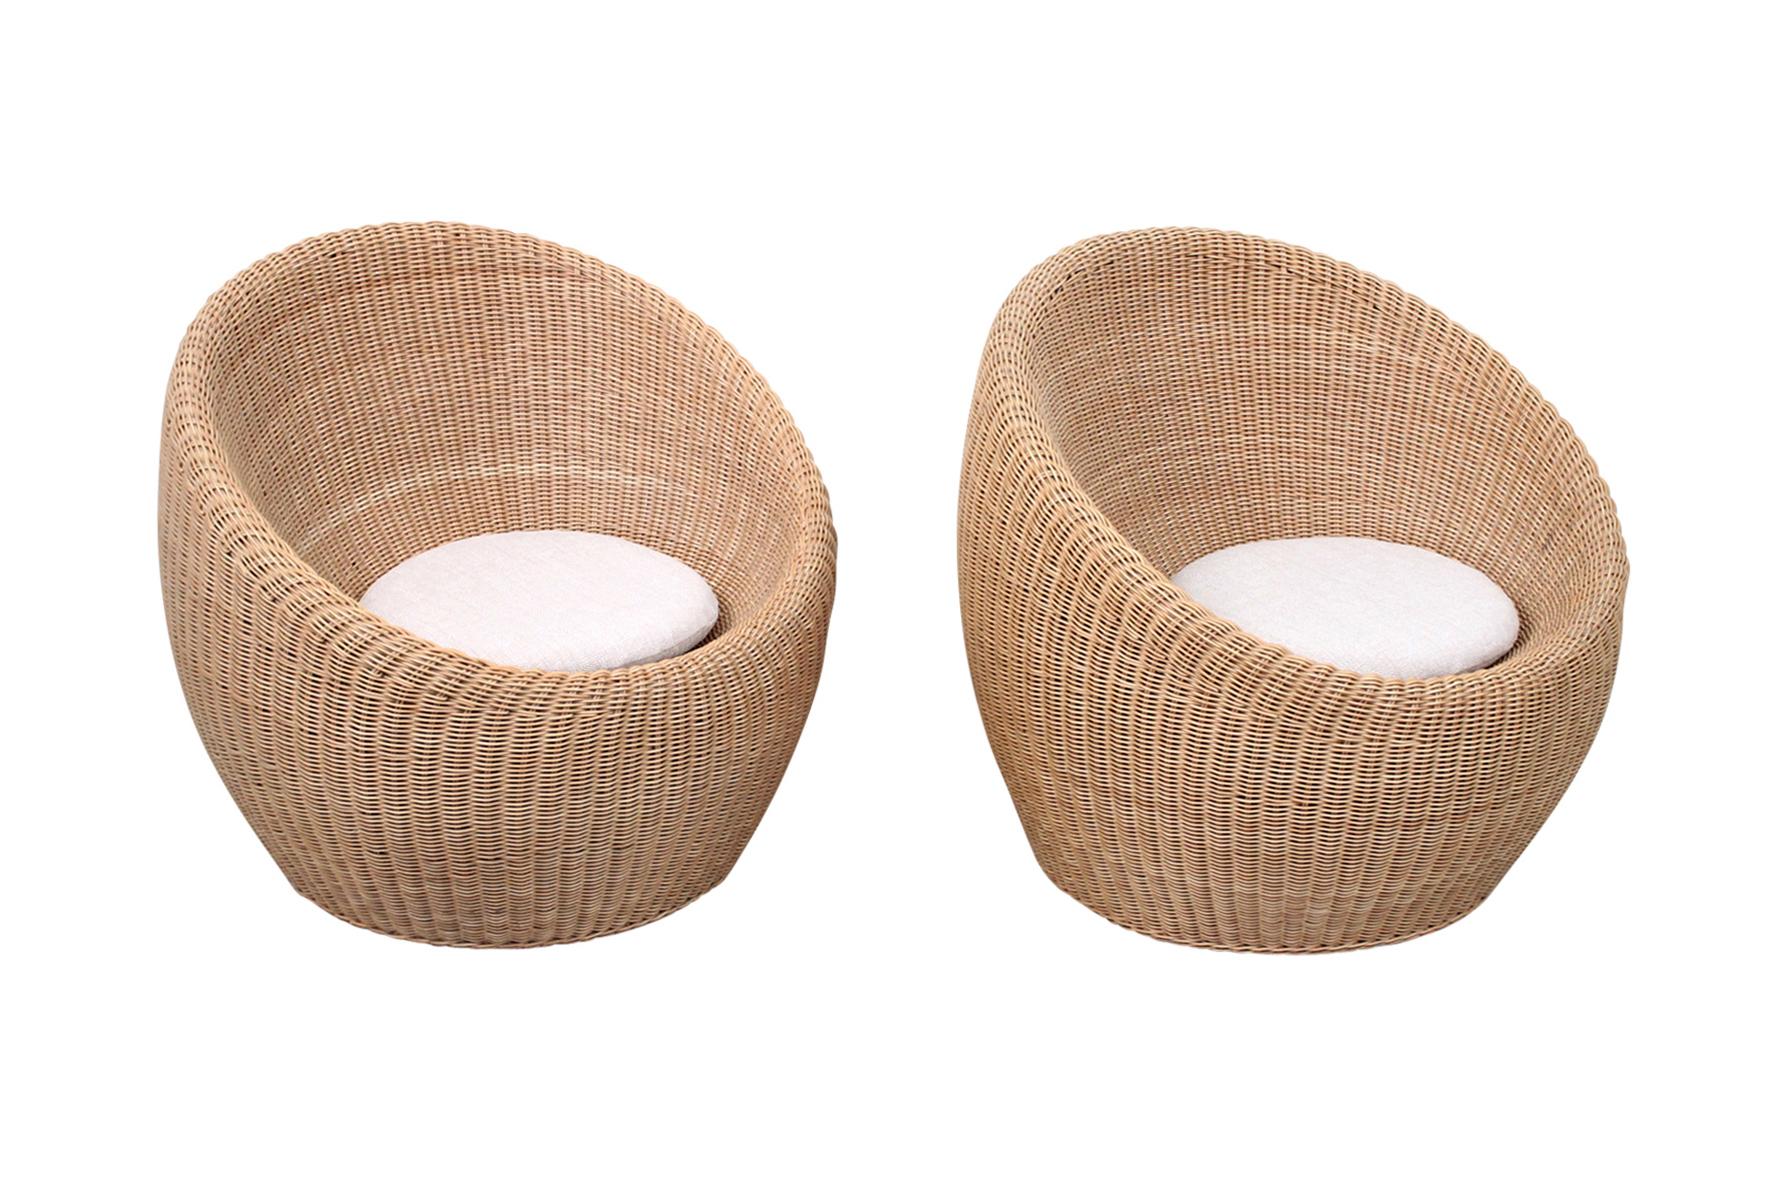 Pair of rattan lounge chair with loose upholstered cushions designed by Japanese designer Isamu Kenmochi for Yamakawa Rattan. An example of this chair design is pictured in the book 